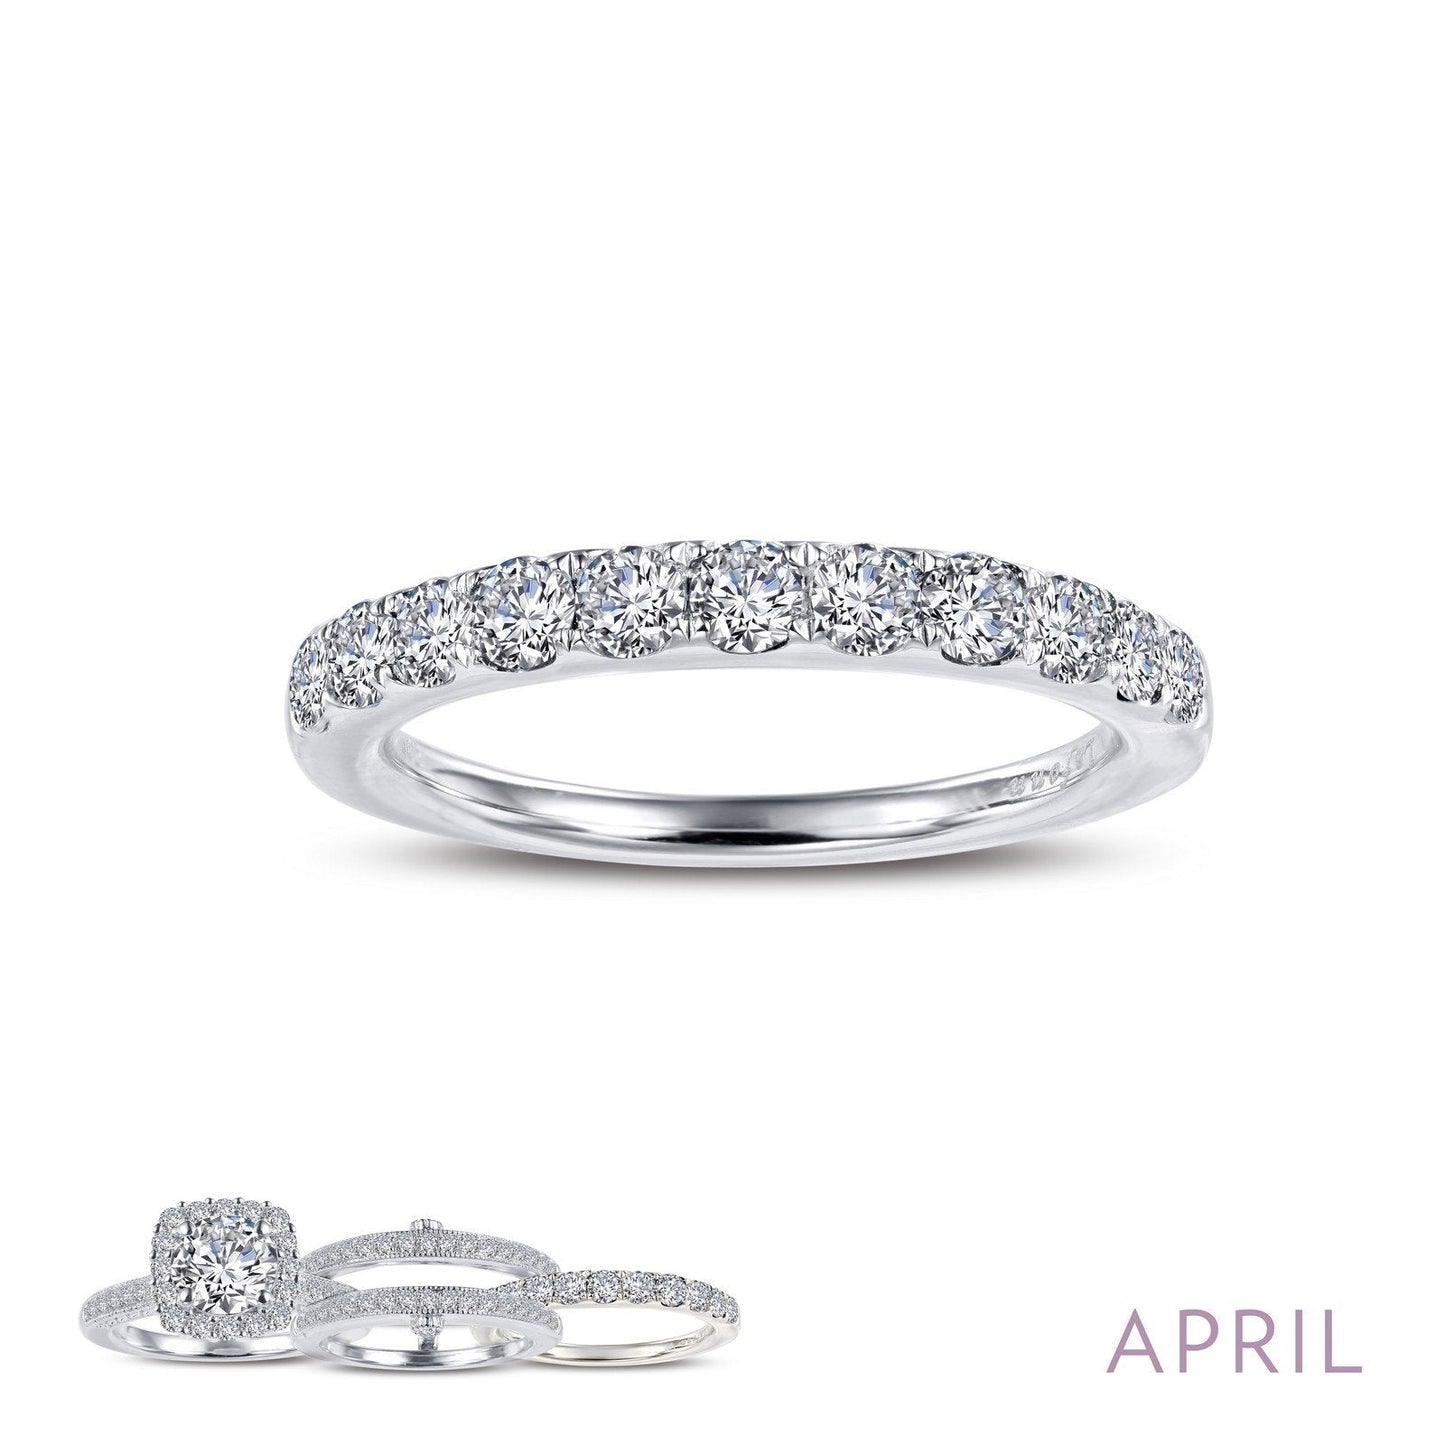 Load image into Gallery viewer, Lafonn April Birthstone Ring APRIL RINGS Size 8 Platinum 0.51cts CTS Approx.2.7mm(W)
